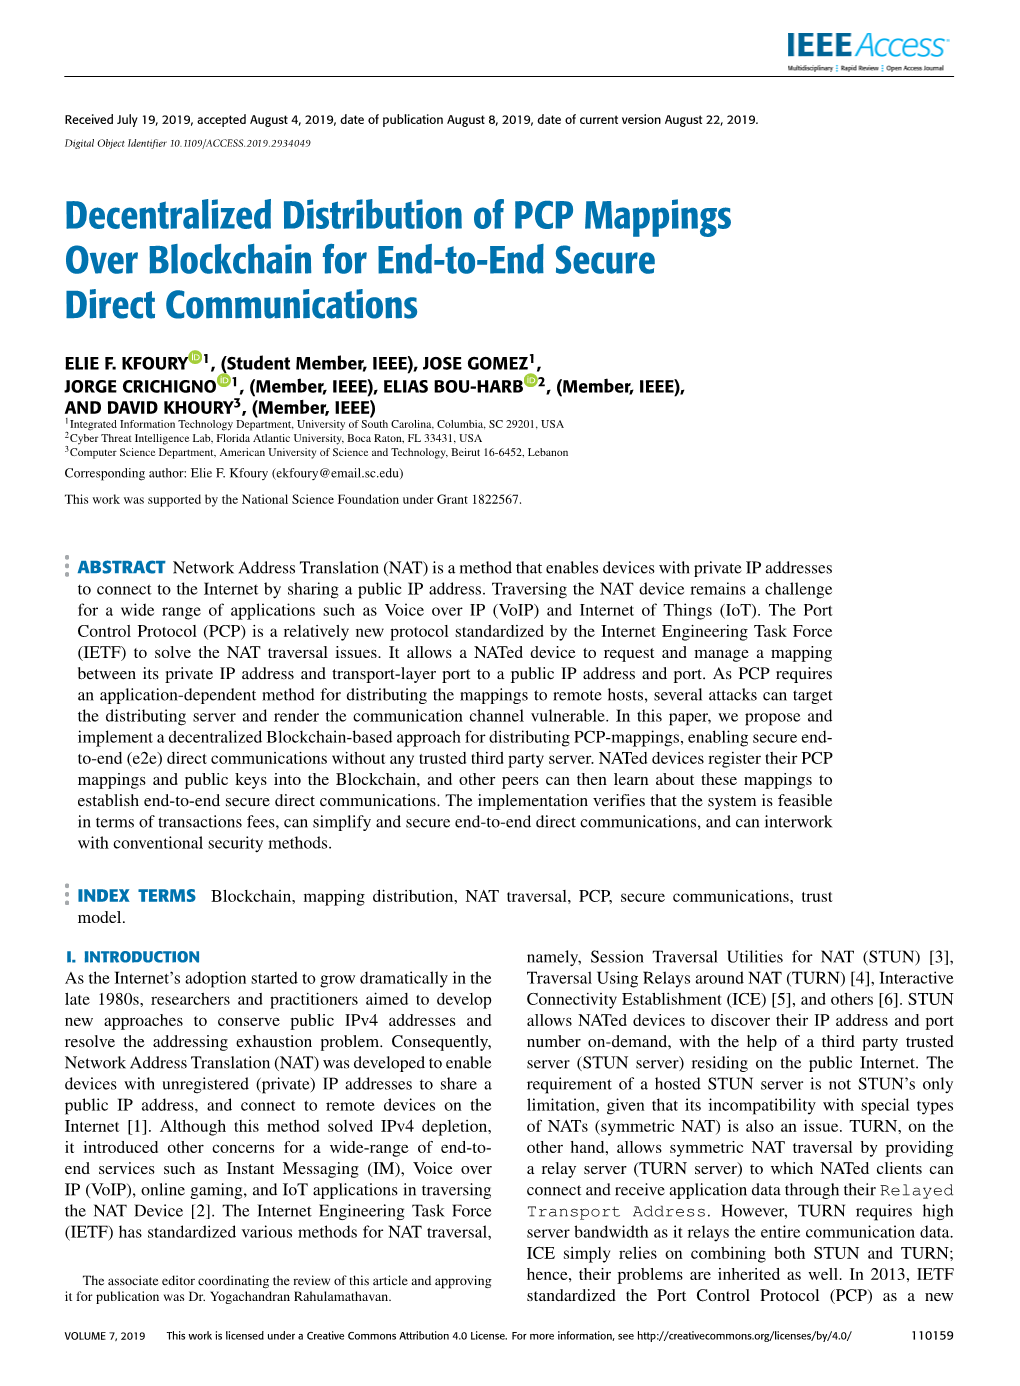 Decentralized Distribution of PCP Mappings Over Blockchain for End-To-End Secure Direct Communications